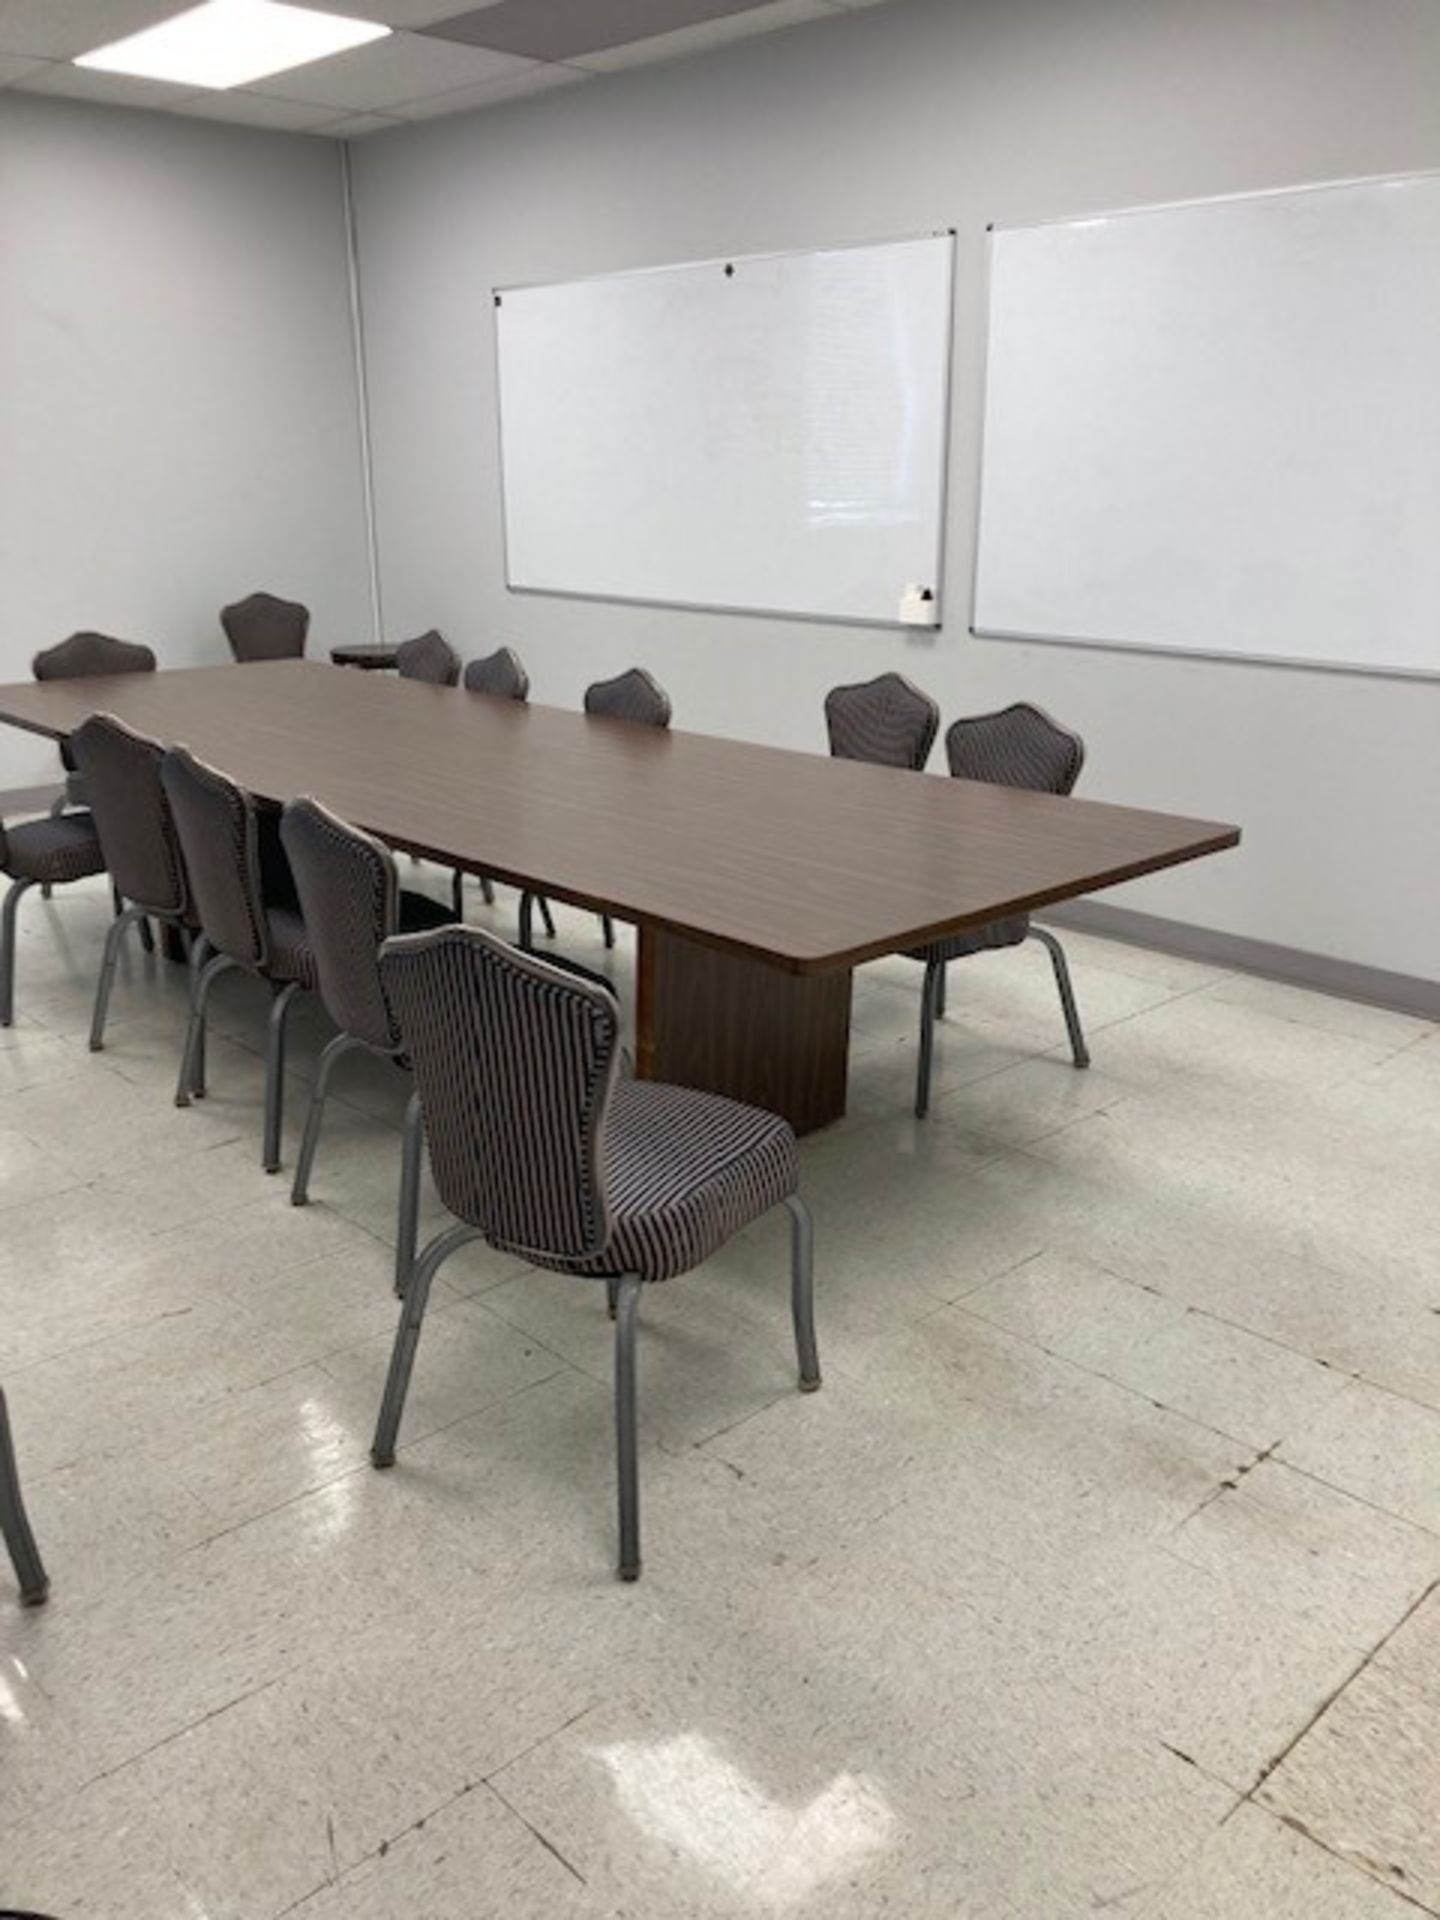 52" x 12' Conference Table with (17) Chairs